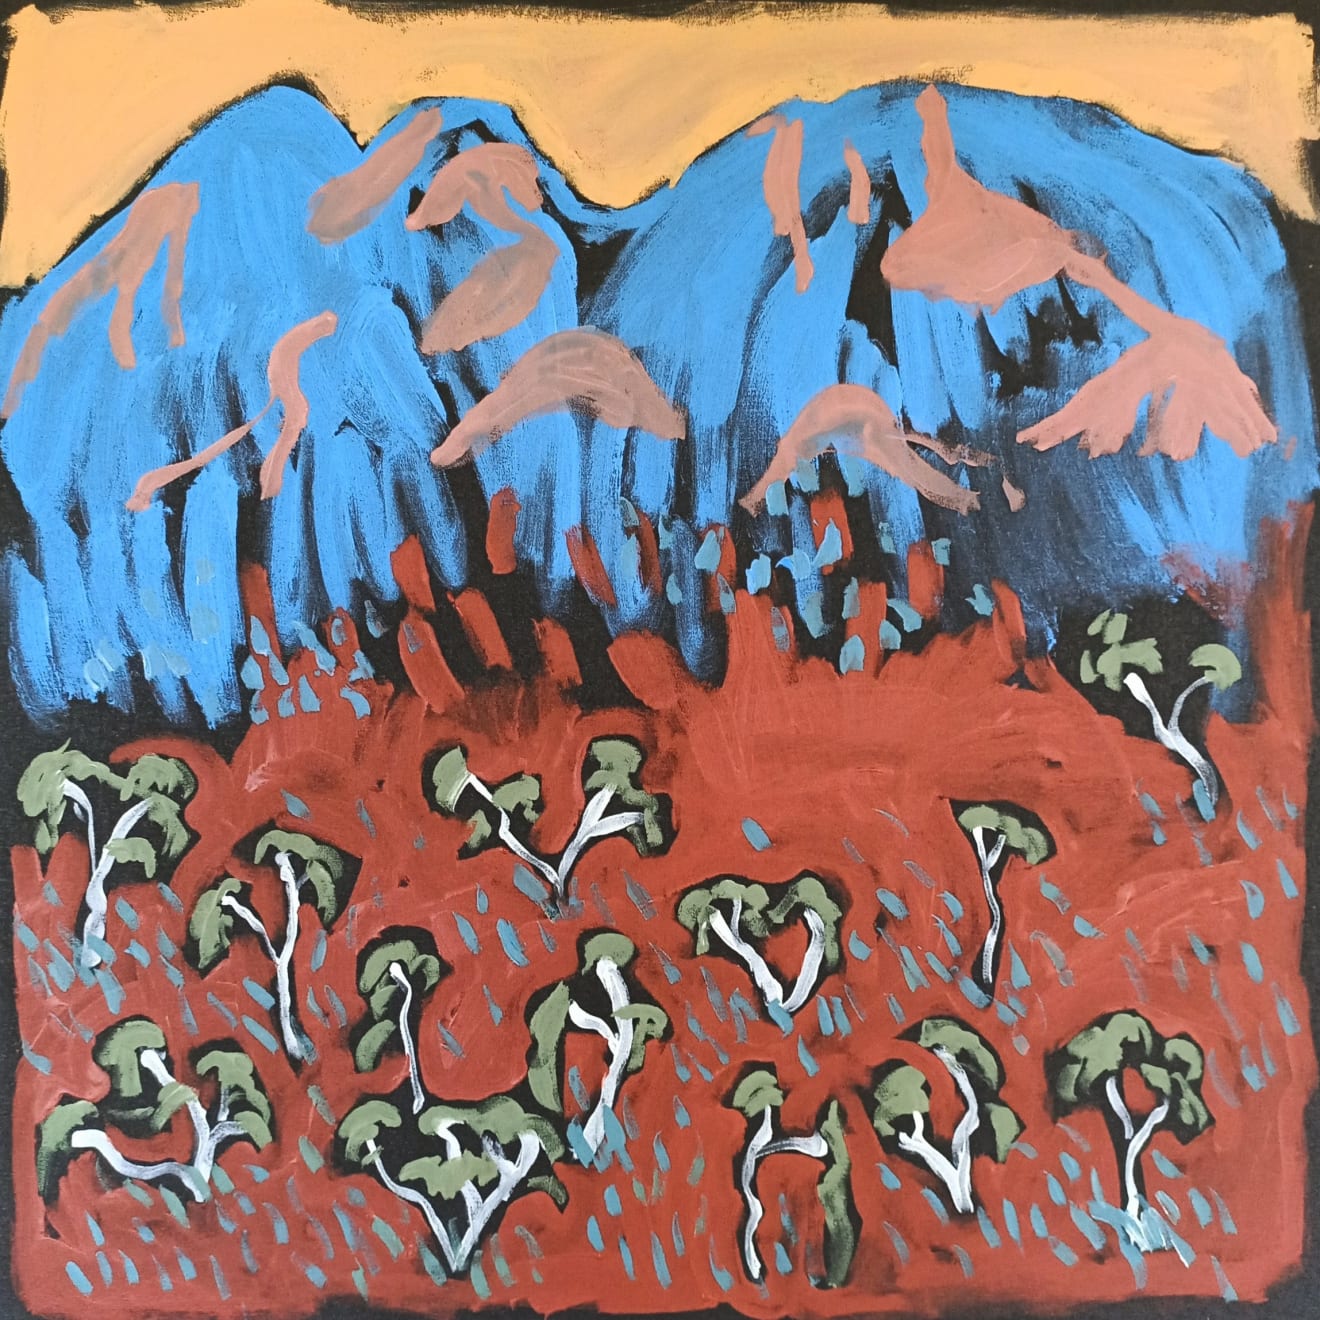 Dusk, wstern arrernte country, west macdonnell ranges Acrylic on Canvas Original 60 x 60 cm AUD $1100 GBP £560 SOLD